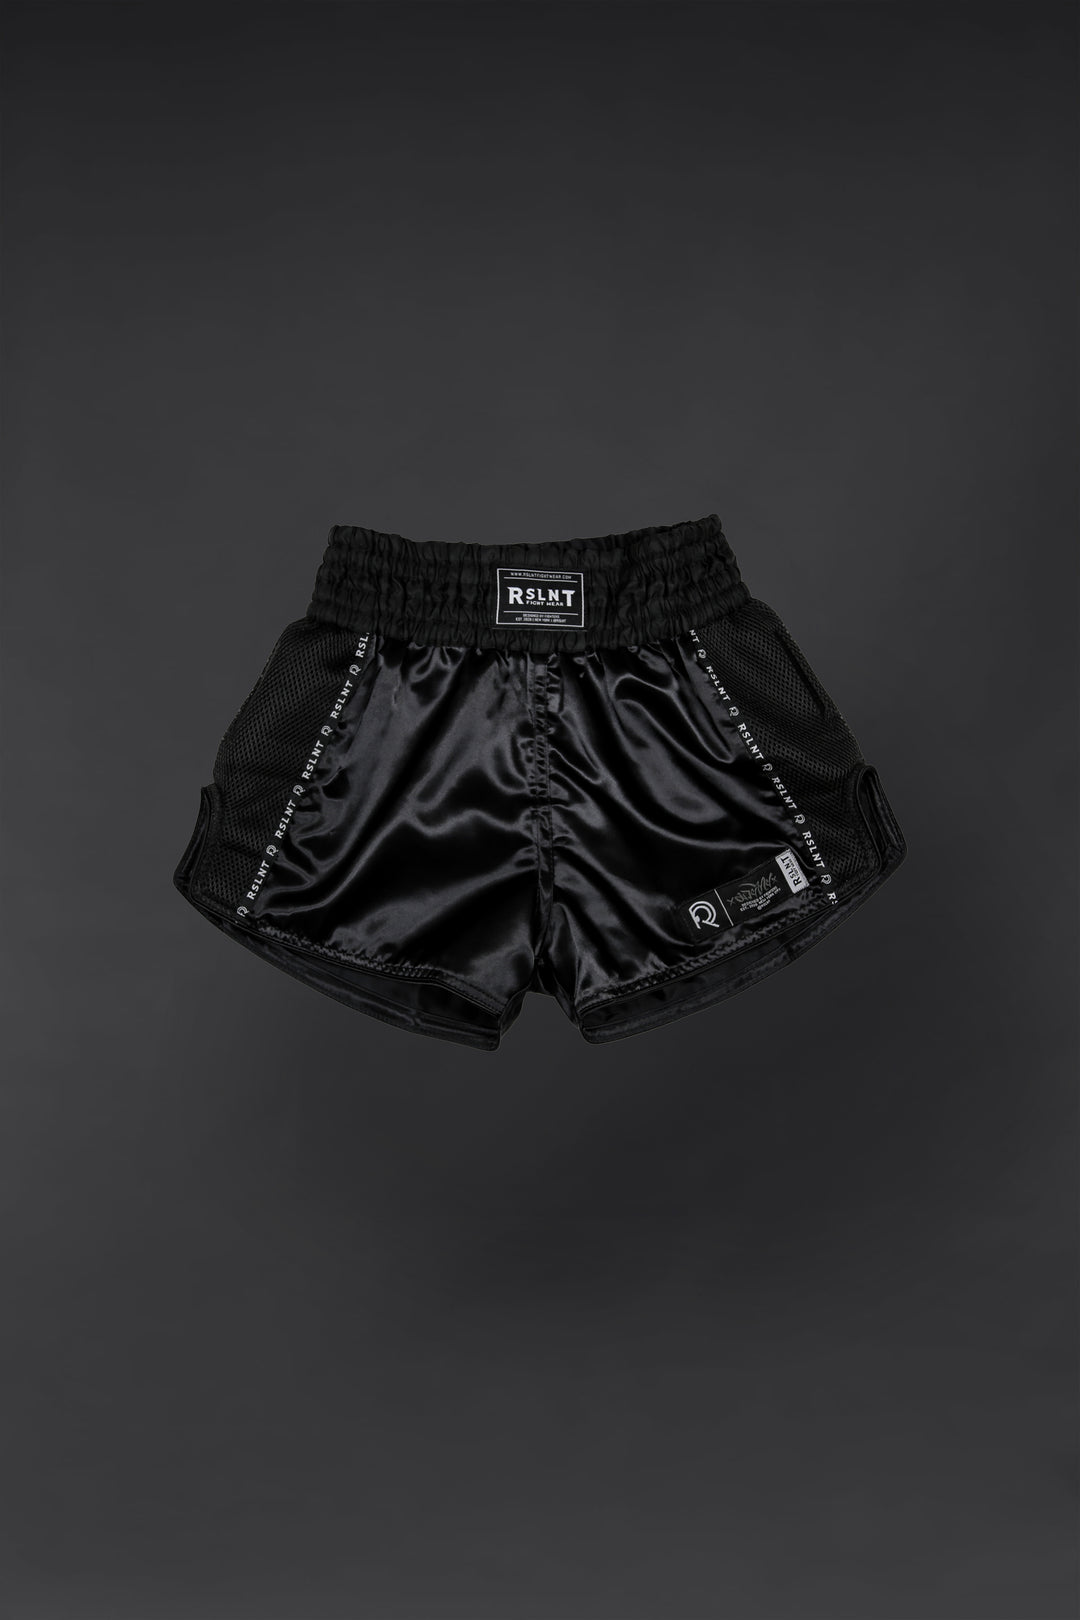 How To Pick The Best Muay Thai Shorts